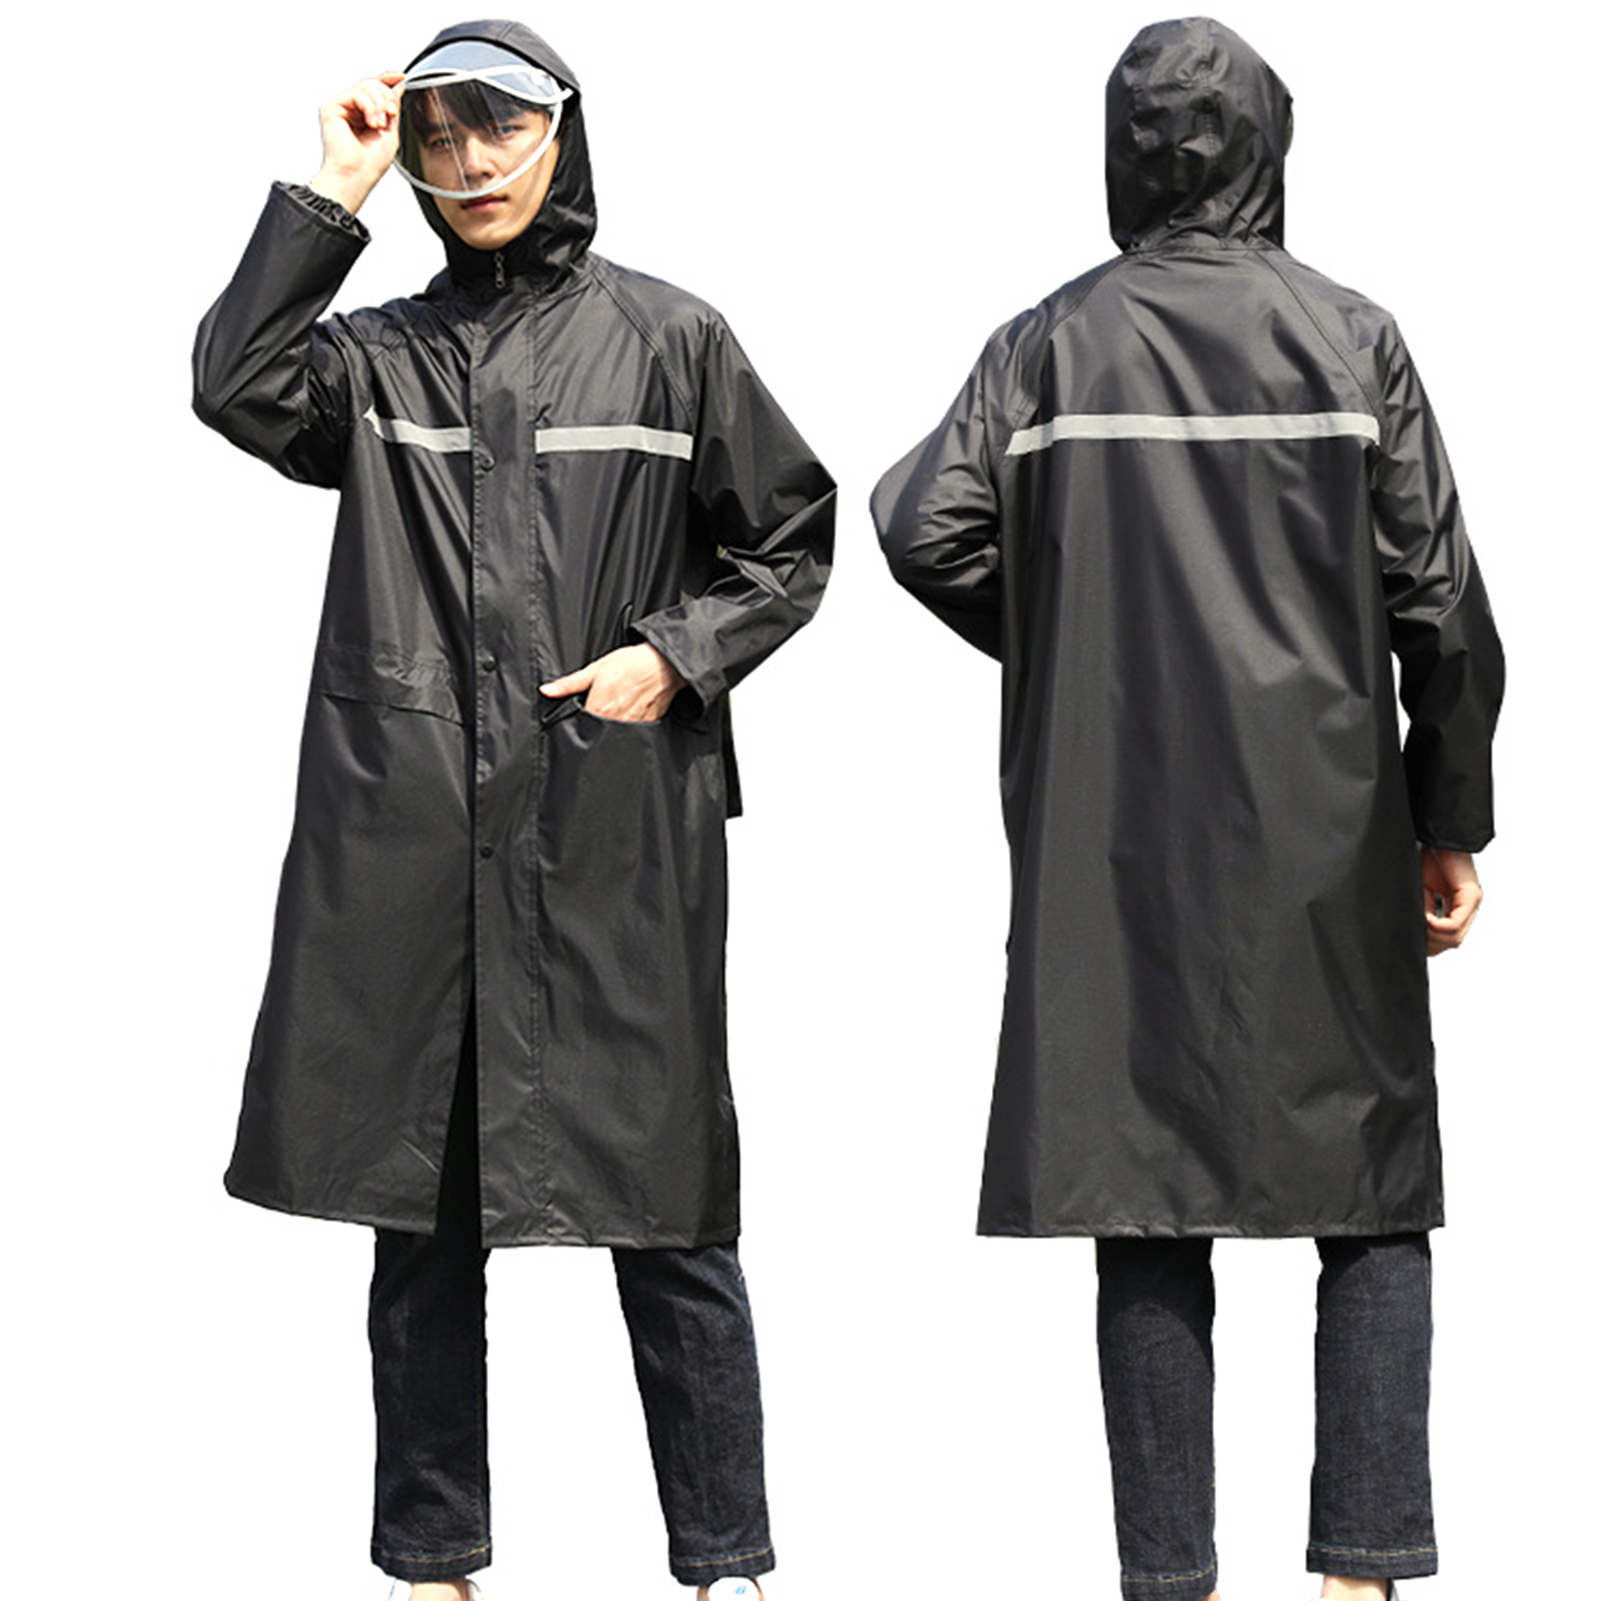 Long Hooded Raincoat for Outdoor Cycling - Stay Dry and Visible in Size 4XL